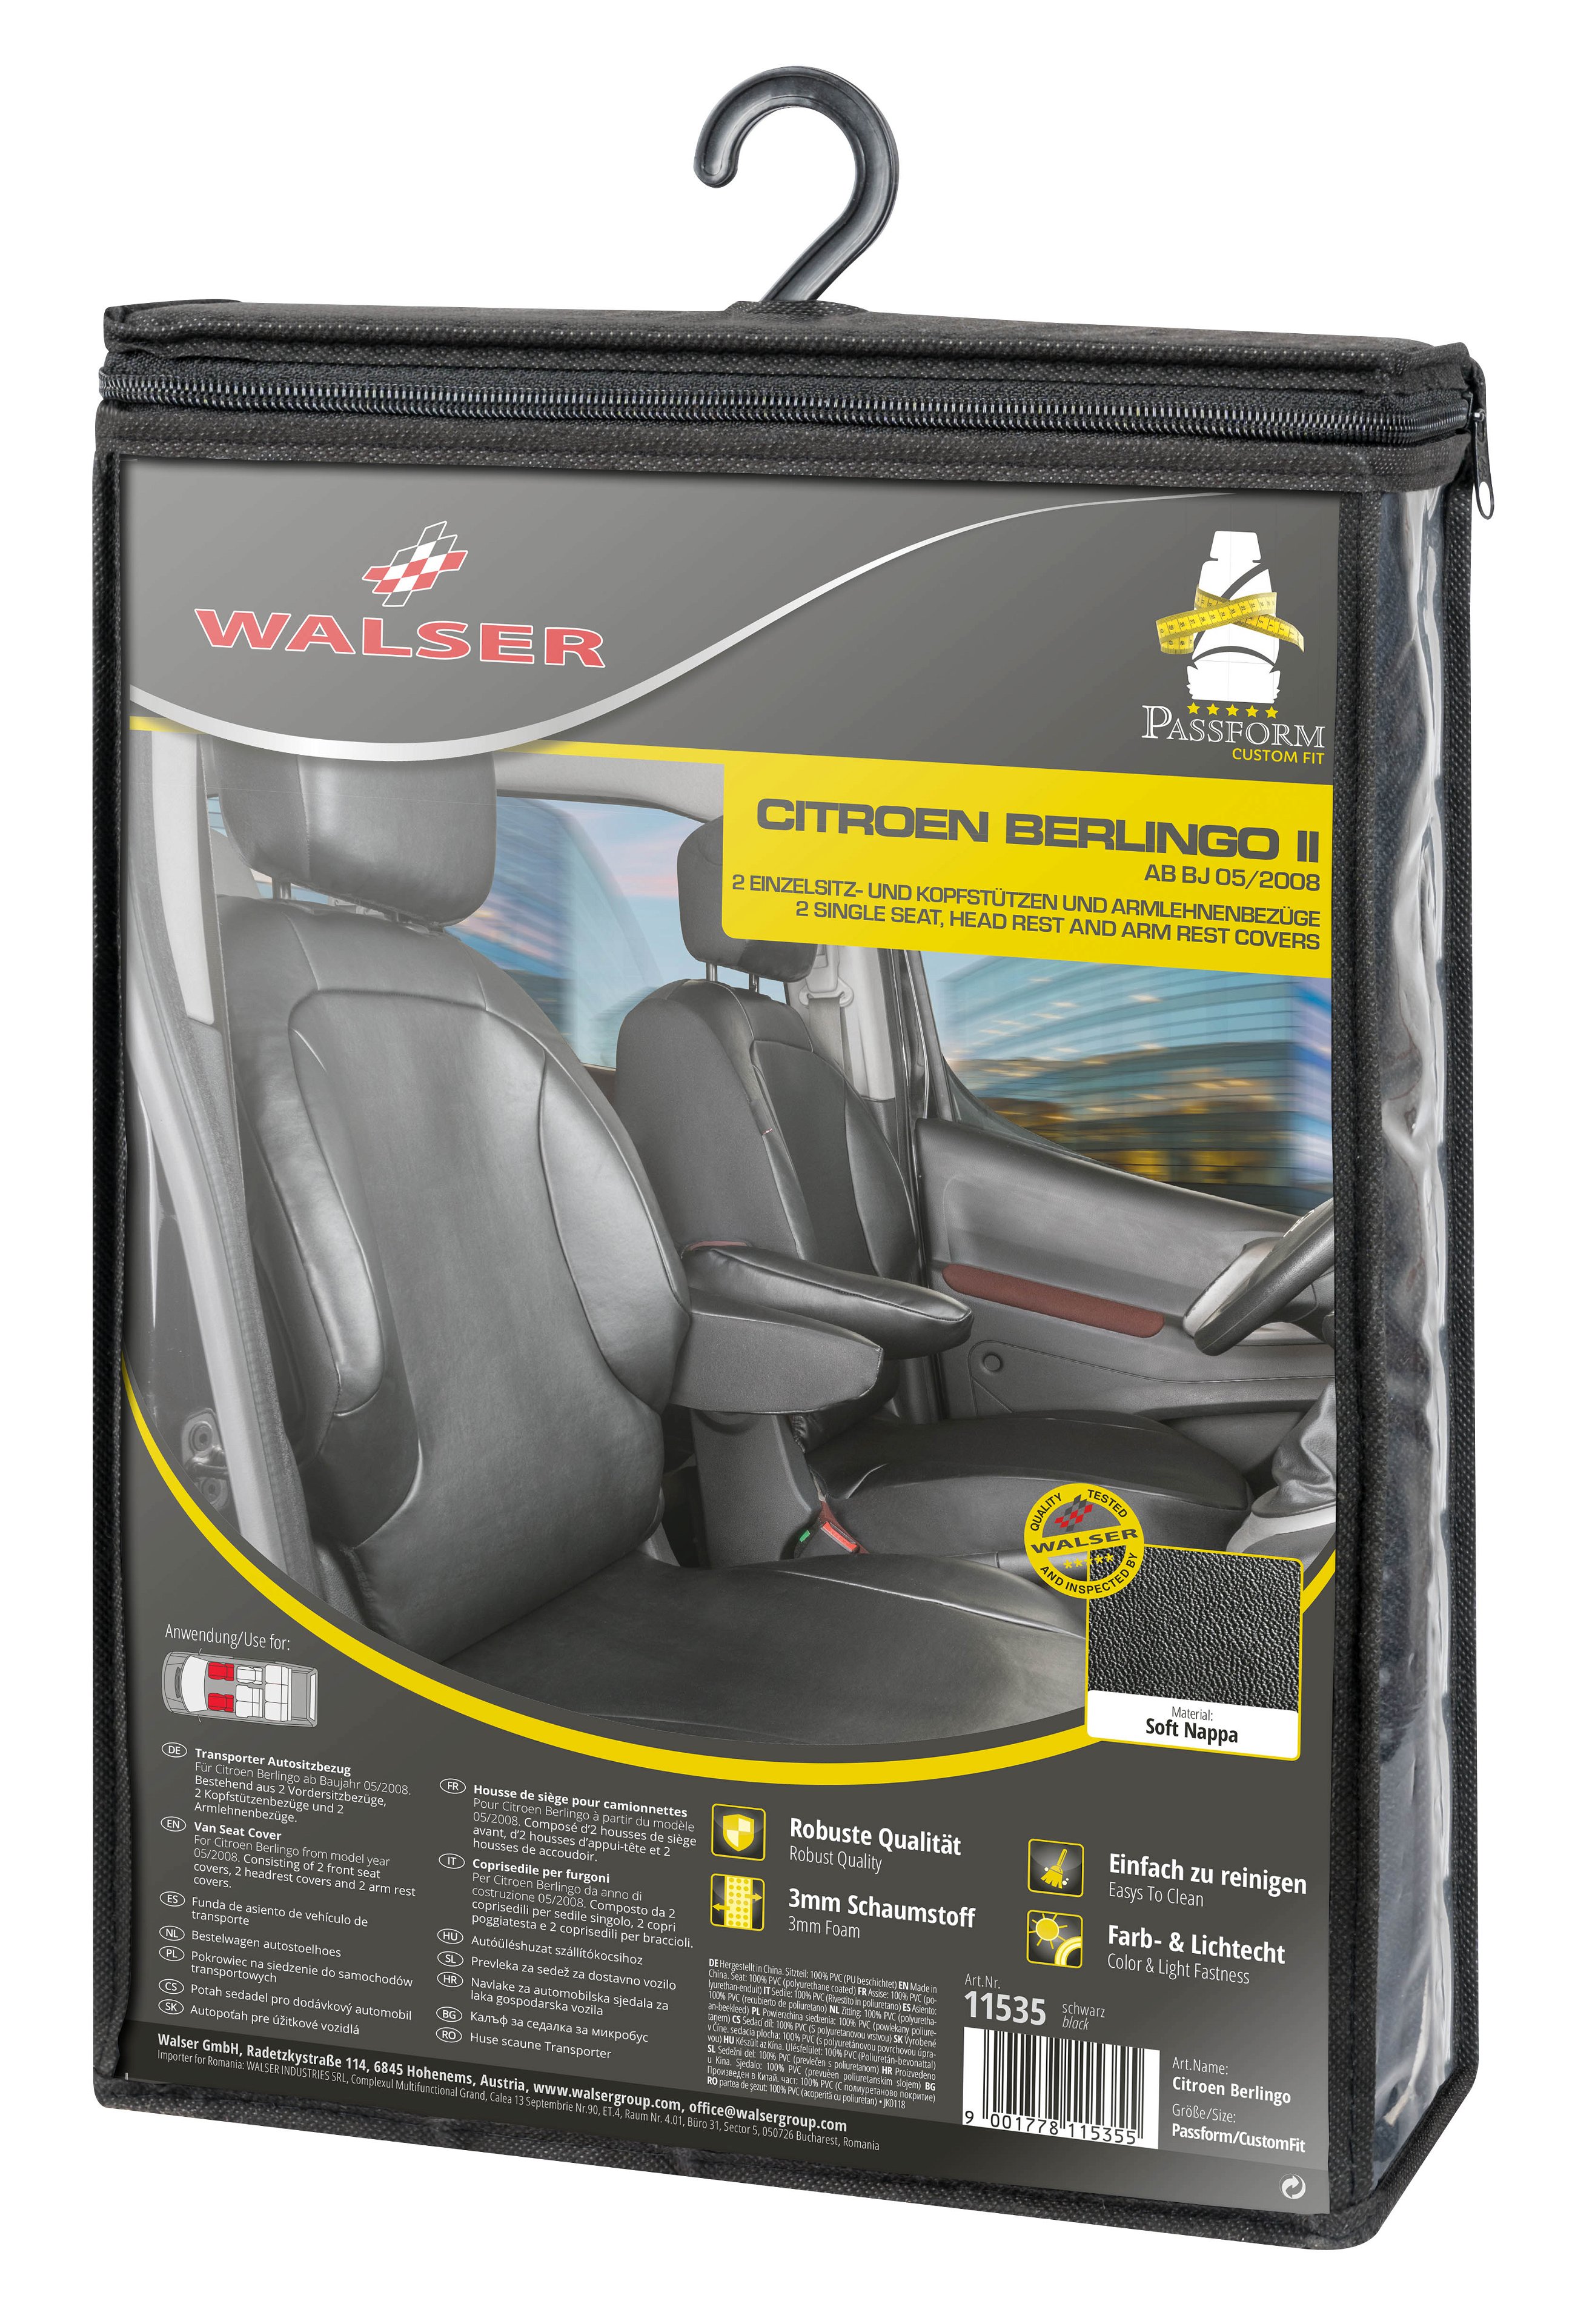 Car Seat cover Transporter made of imitation leather for Citroen Berlingo, 2 single seats front